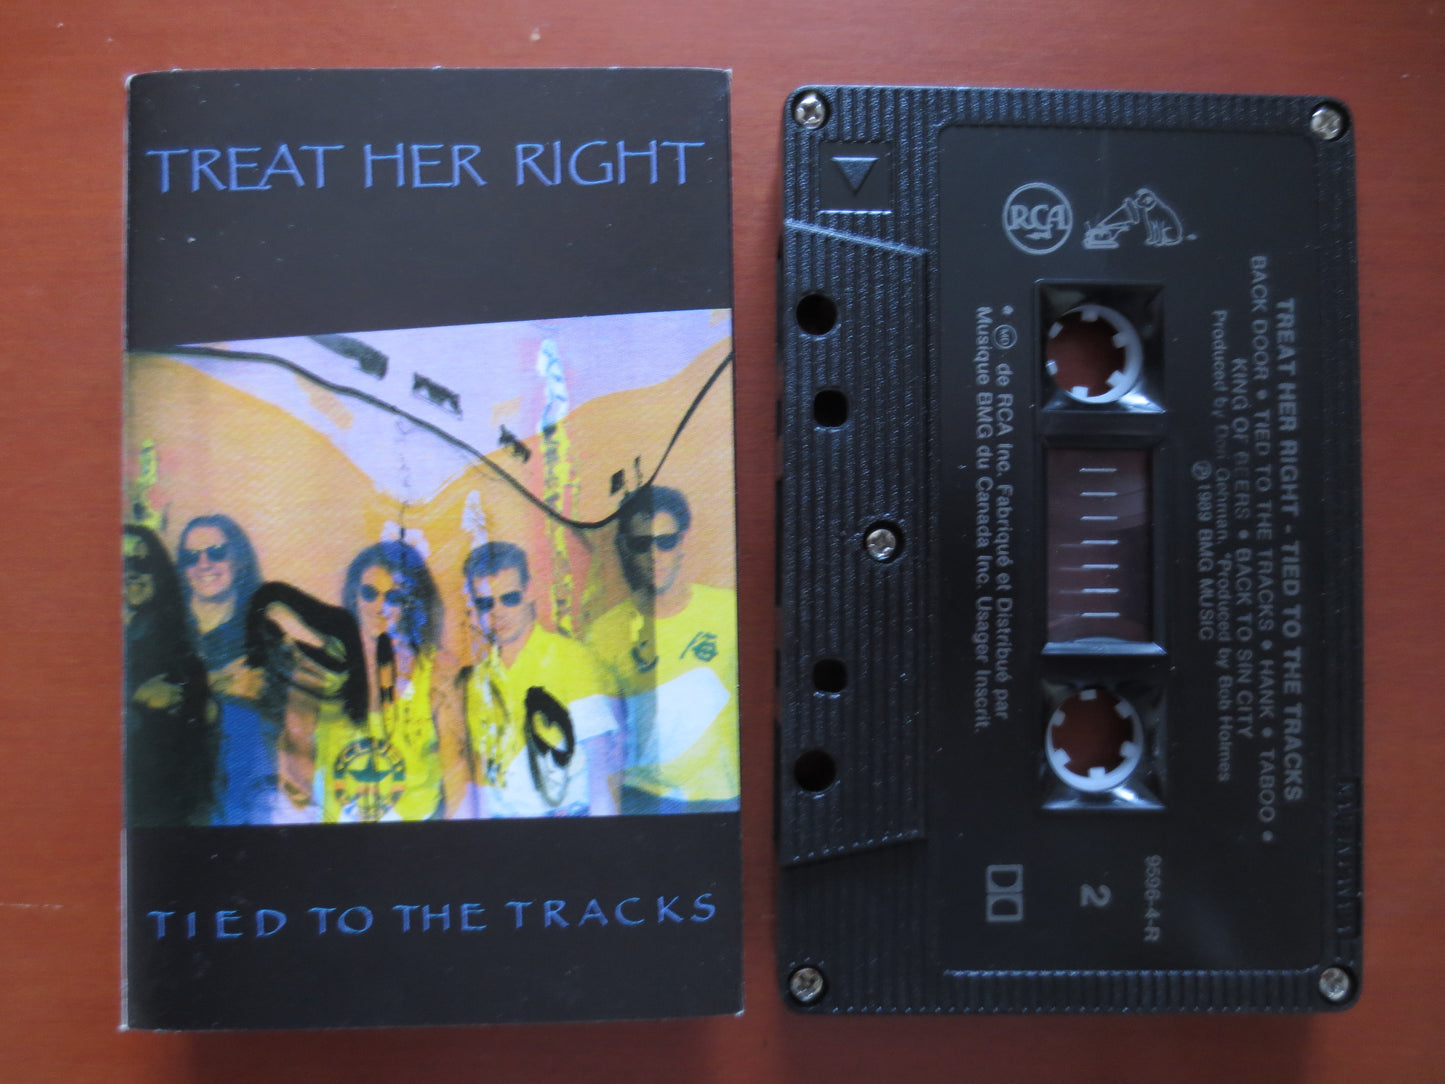 TREAT HER RIGHT, Tied to the Tracks, Treat Her Right Lp, Blues Rock Music, Blues Lp, Tape Cassette, Cassette, 1989 Cassette